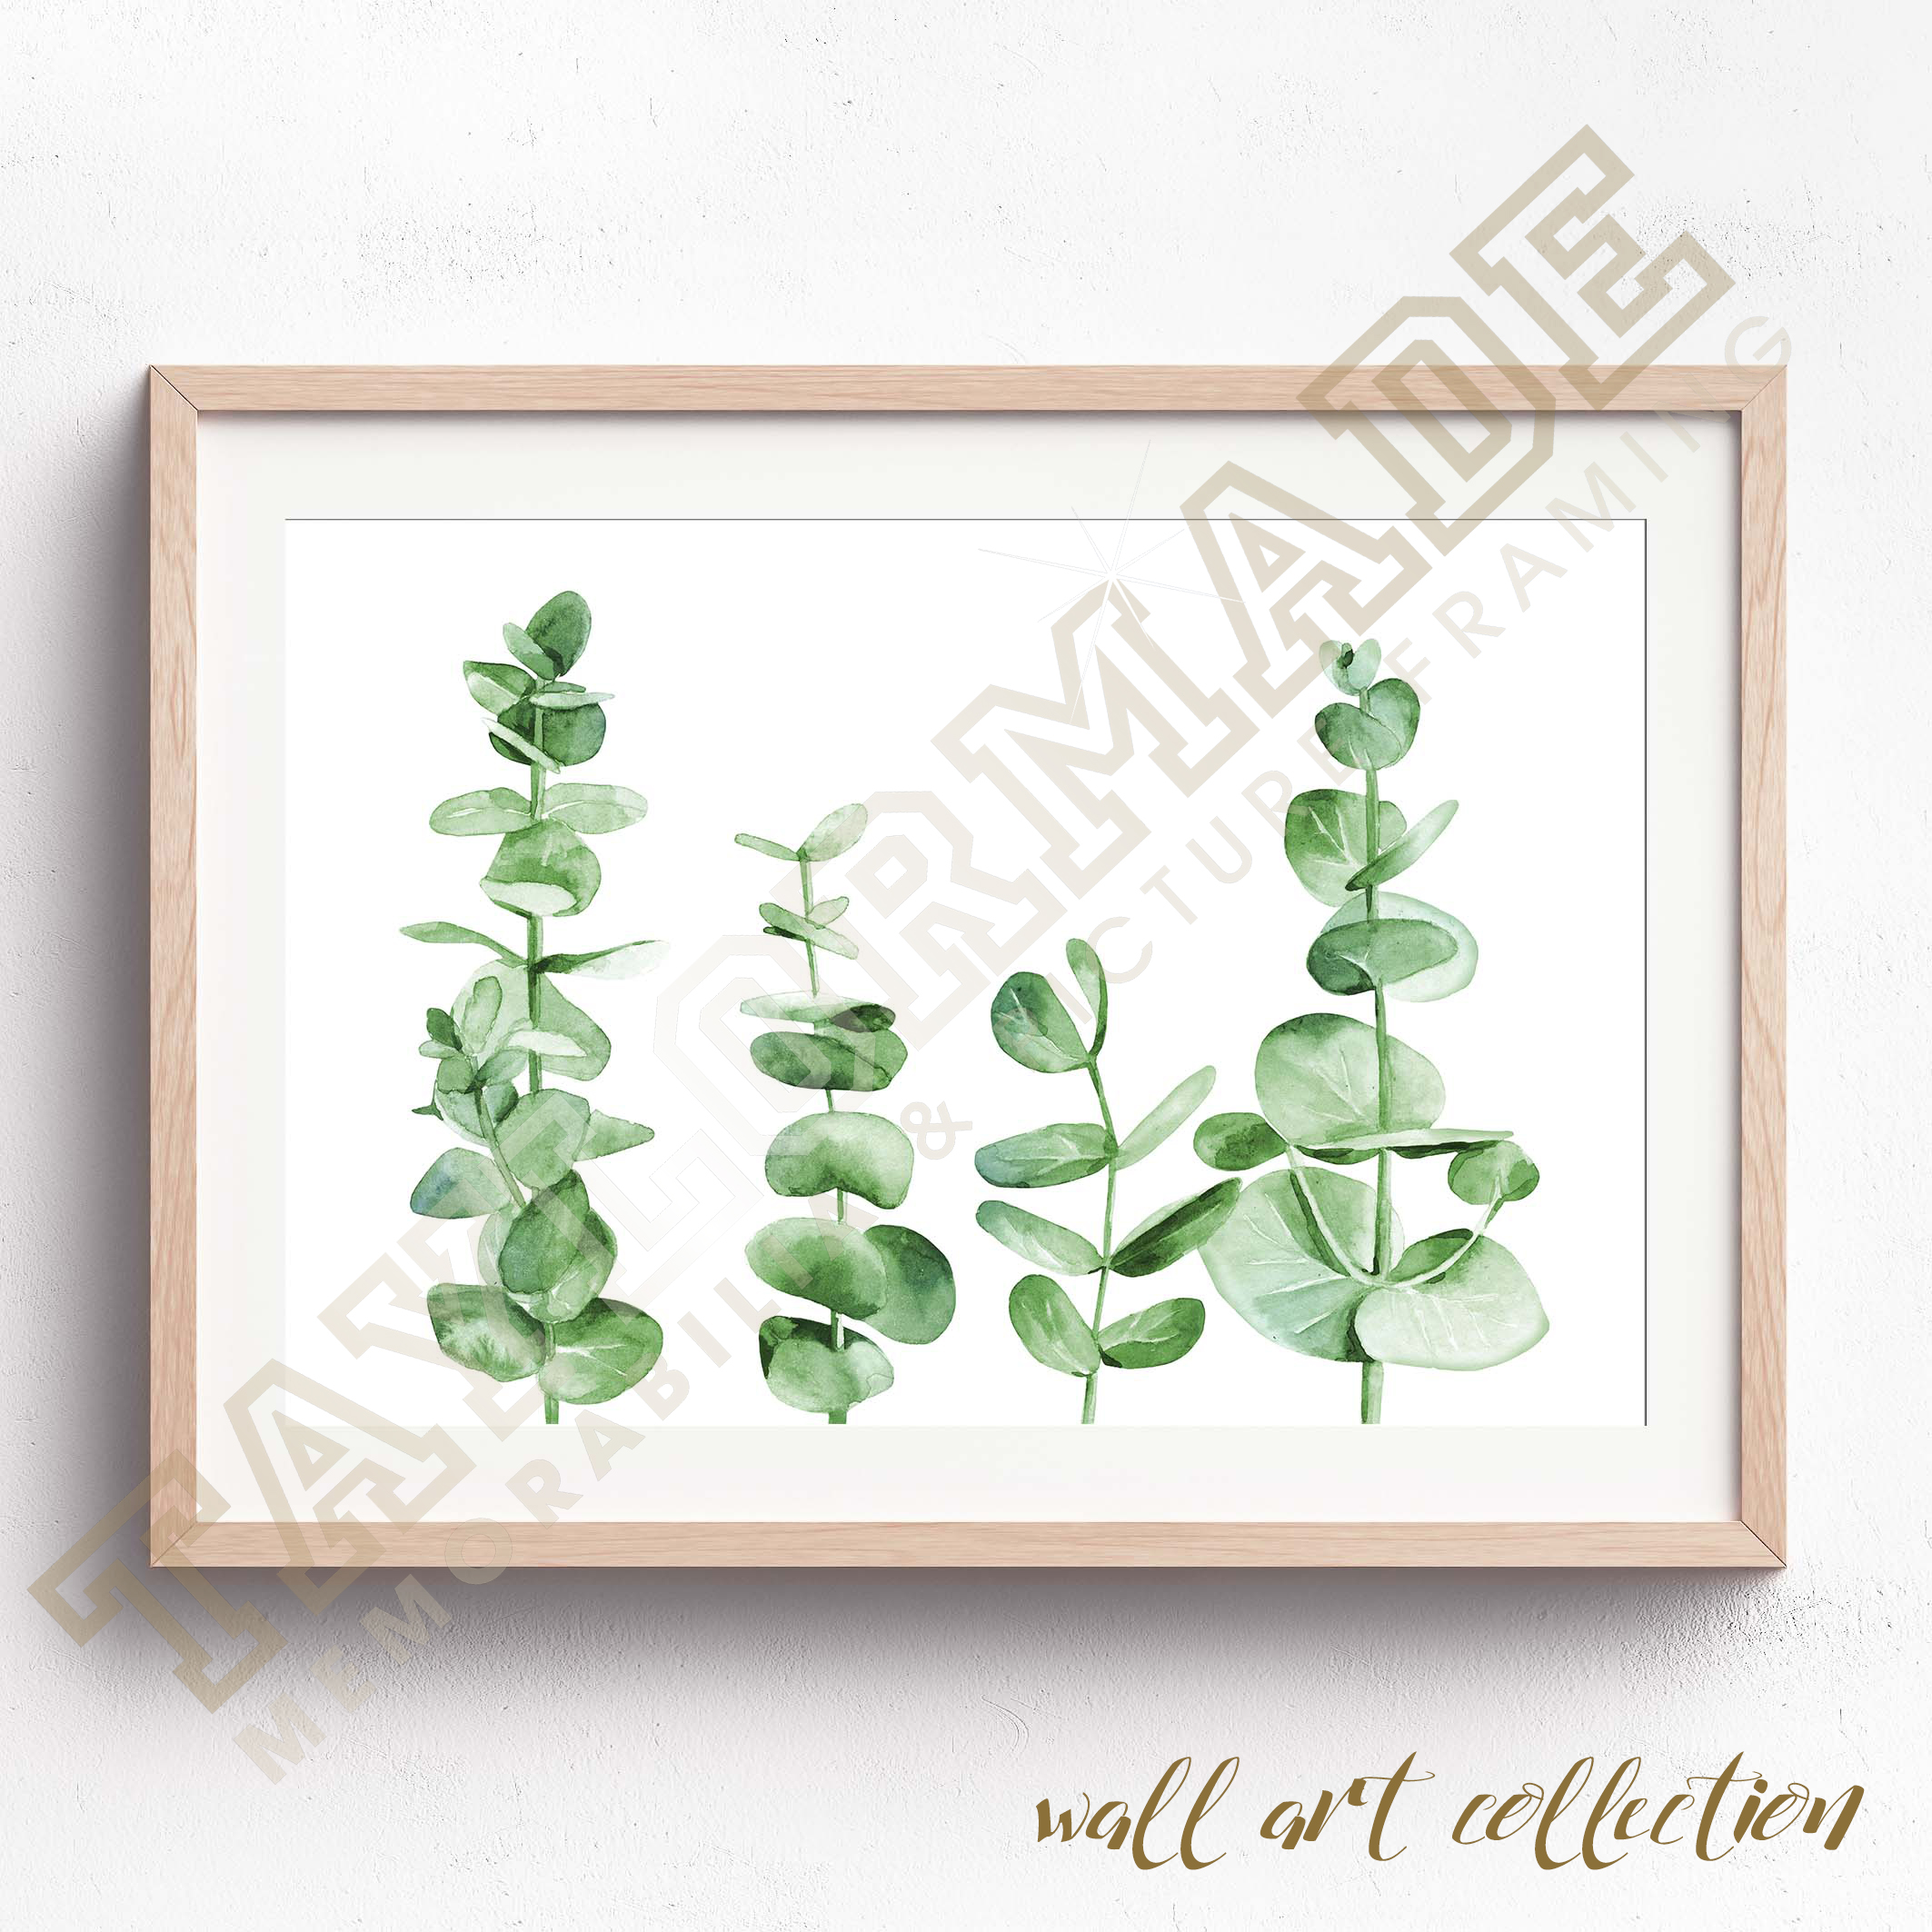 Wall Art Collection – Greenery